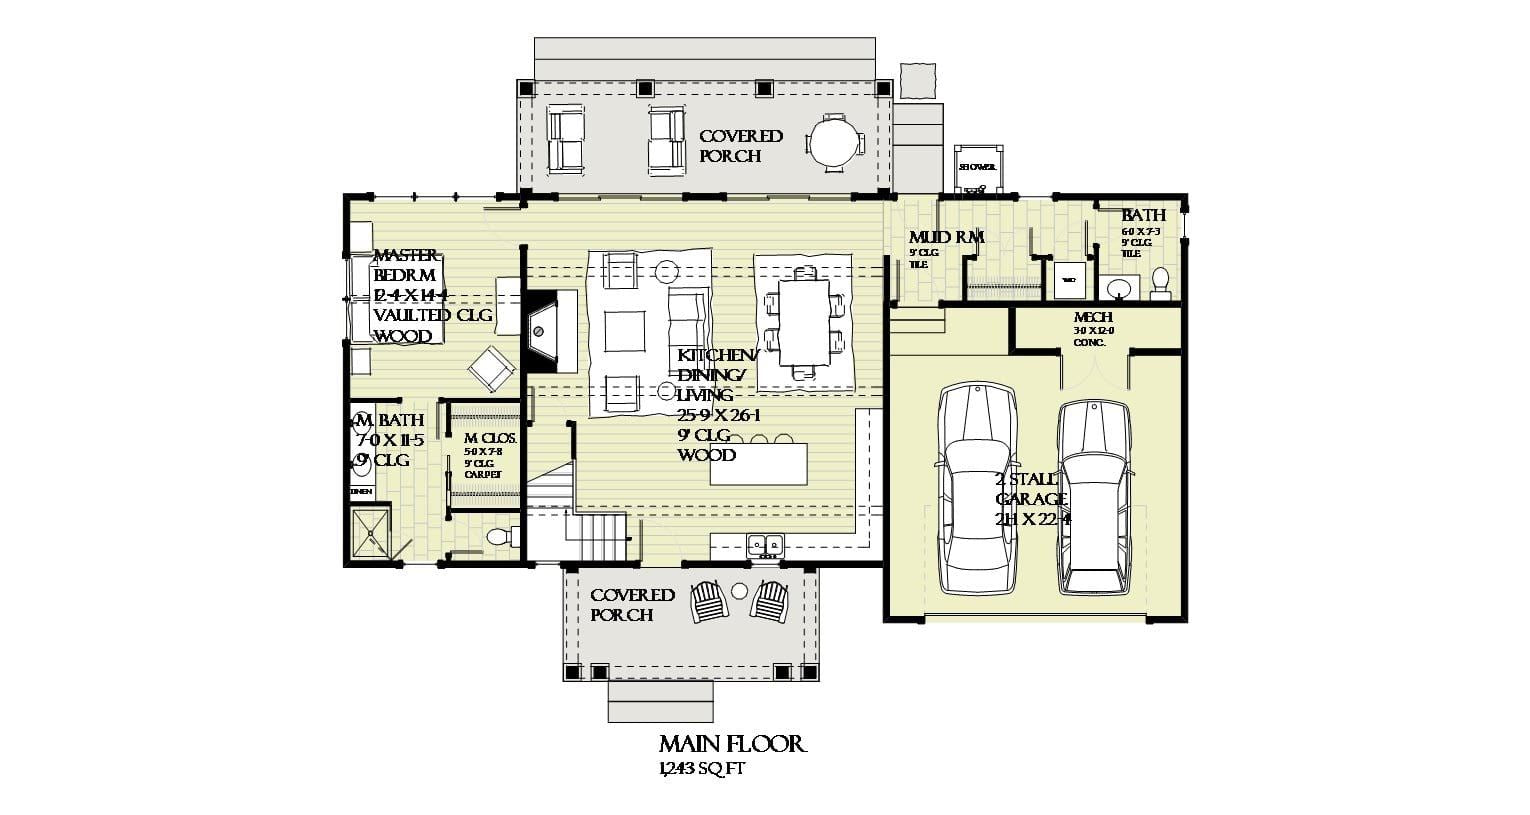 Penwood - Home Design and Floor Plan - SketchPad House Plans